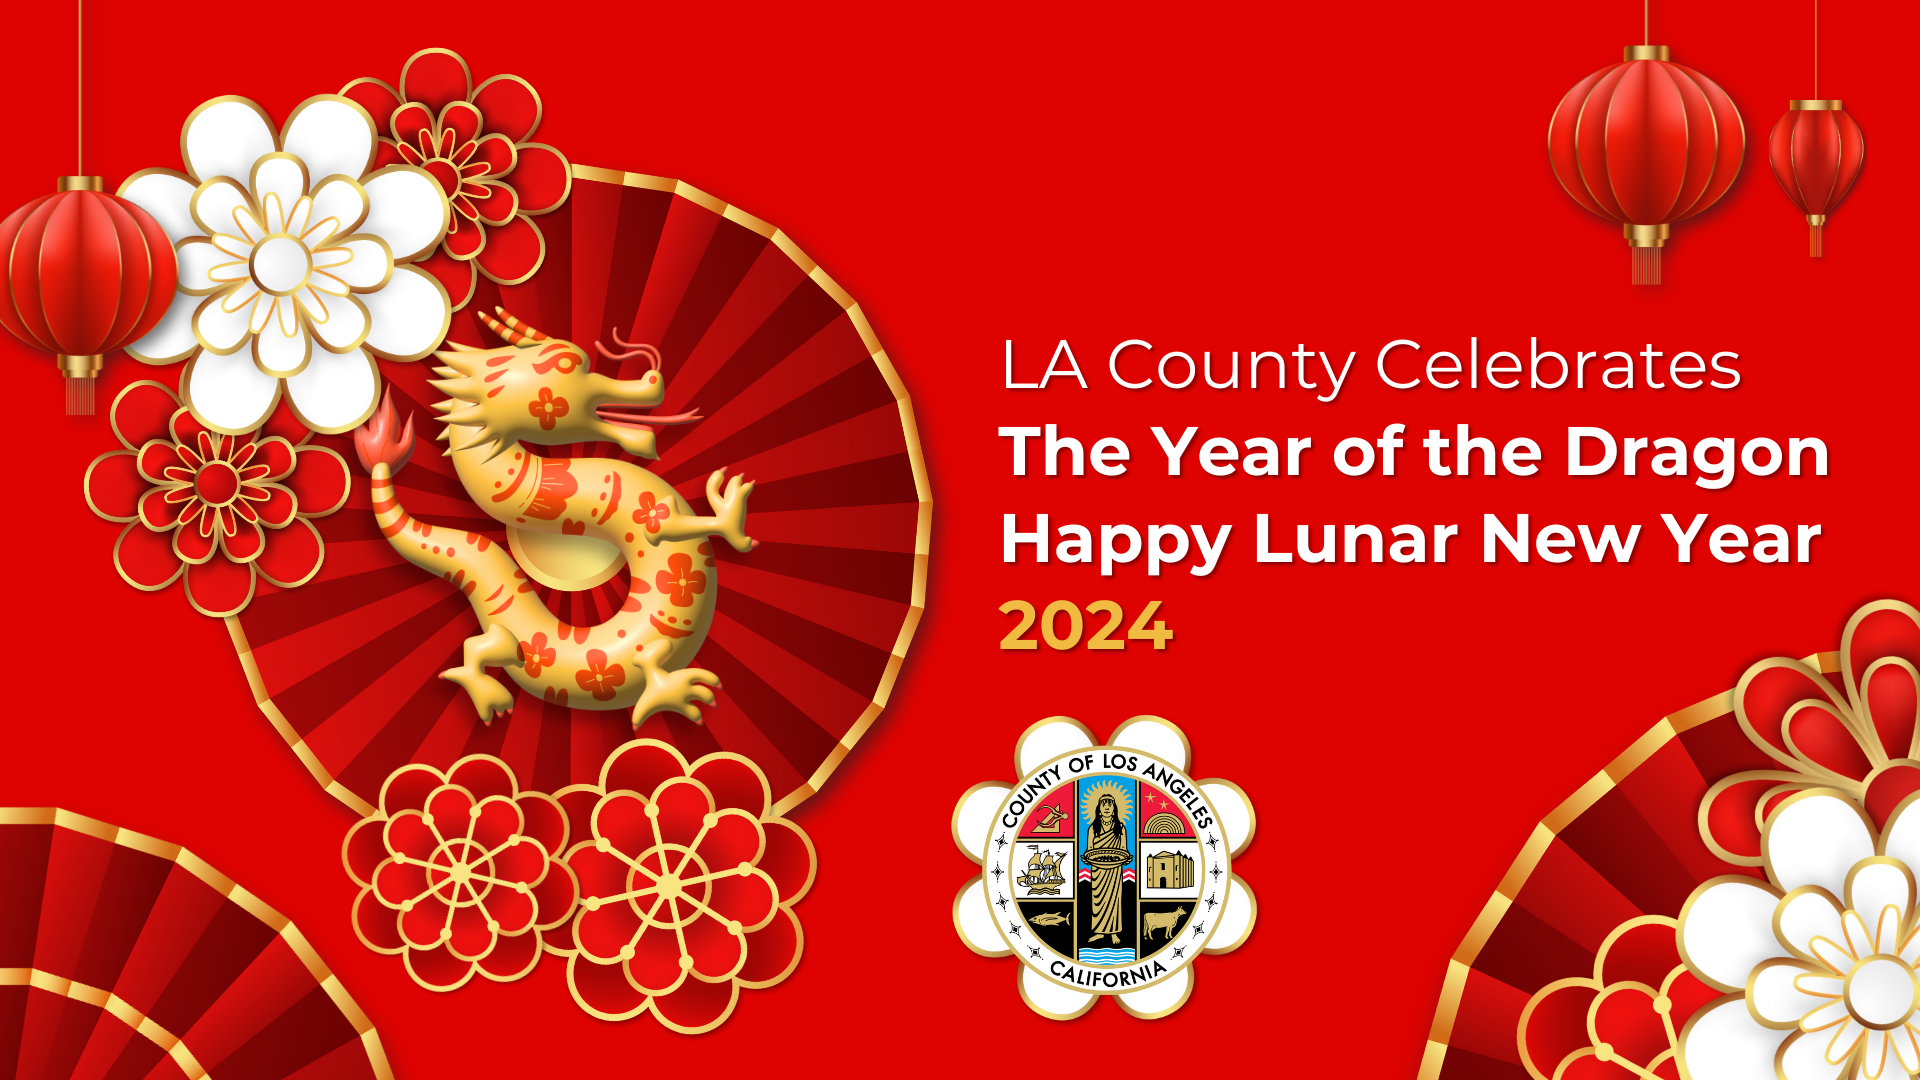 LA County Celebrates the year of the Dragon. Happy Lunar New Year.